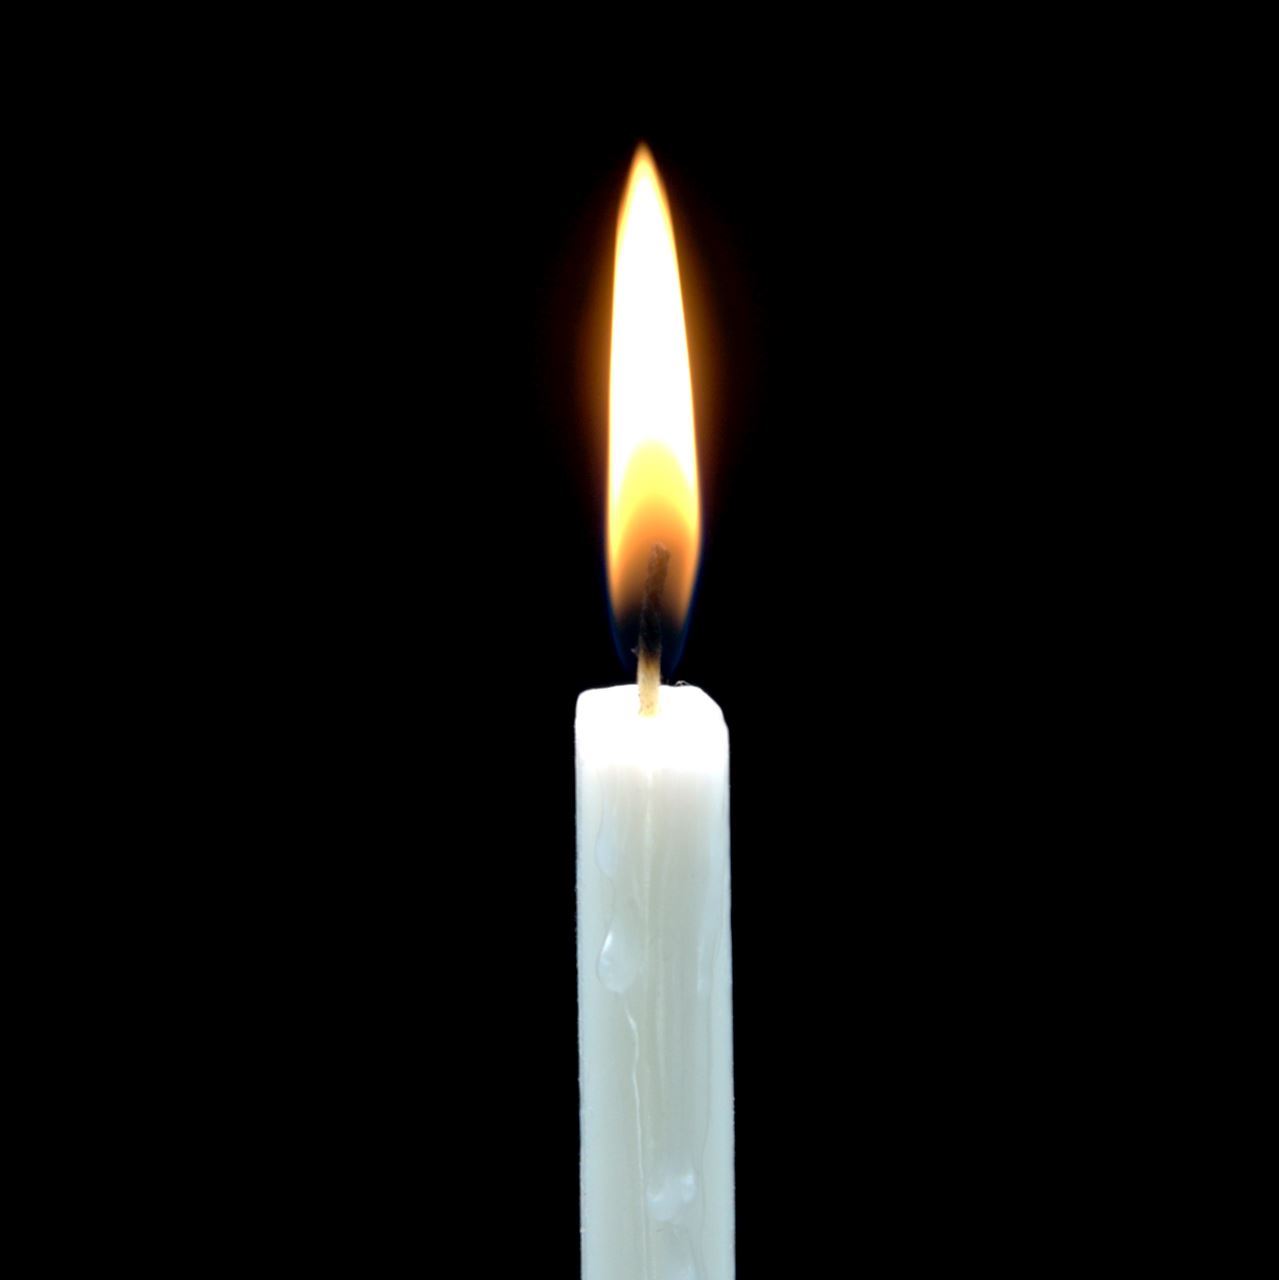 Thin, white lit candle against black background